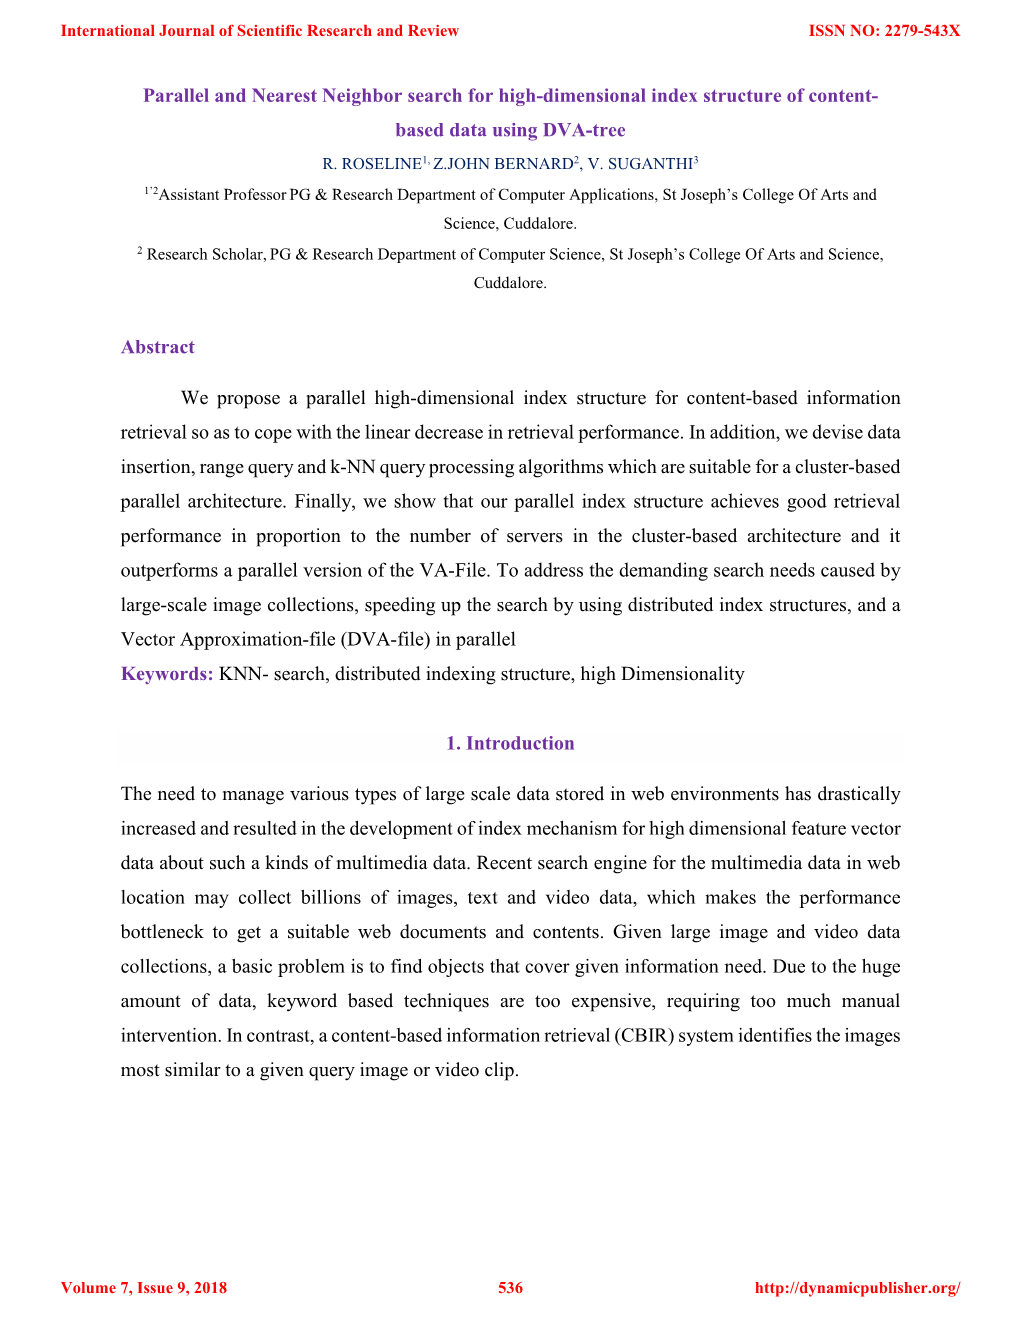 Parallel and Nearest Neighbor Search for High-Dimensional Index Structure of Content- Based Data Using DVA-Tree R